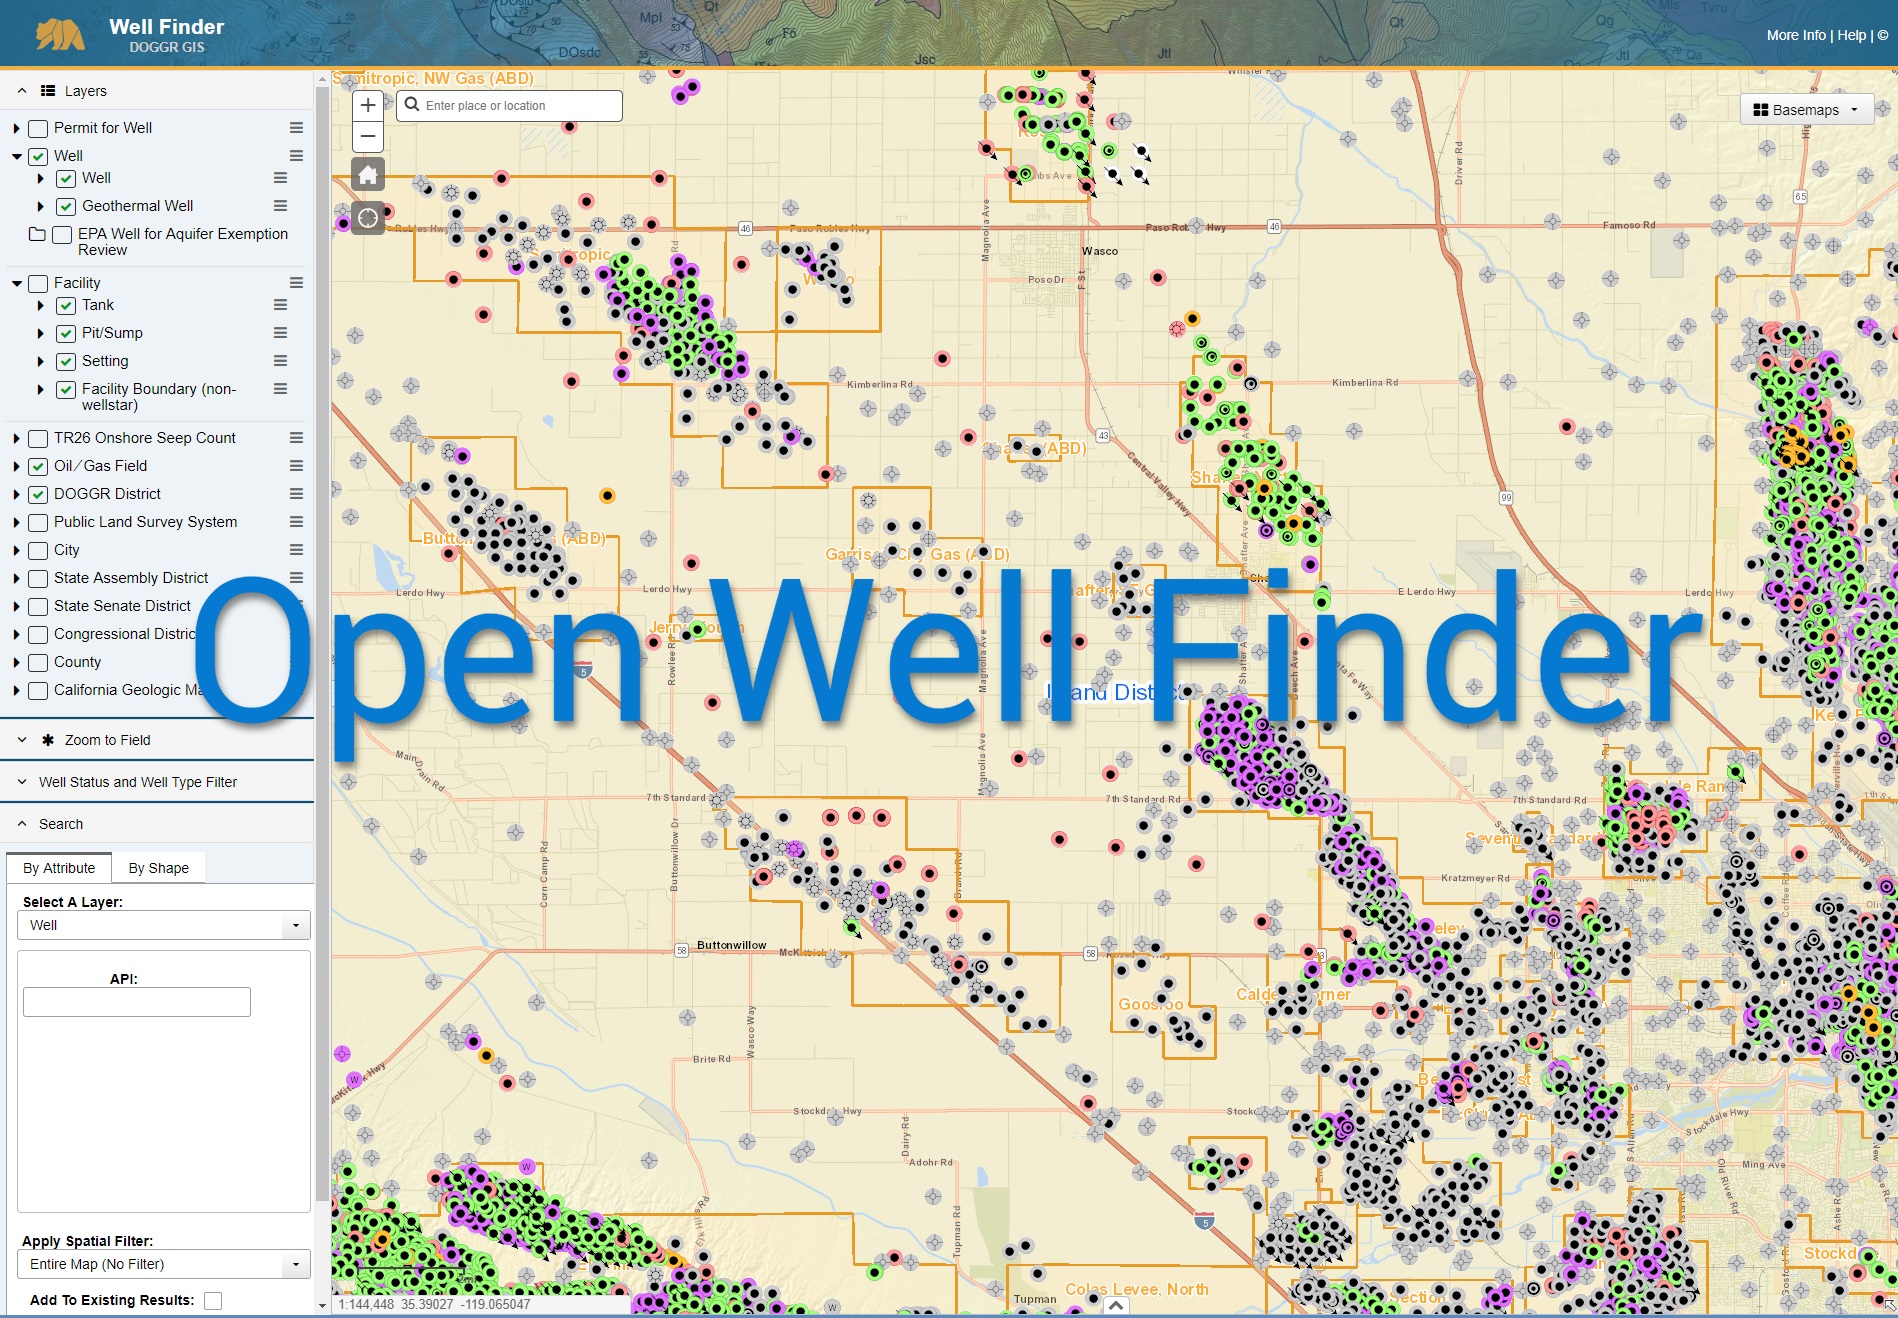 Well Finder Graphic Link to Well Finder App